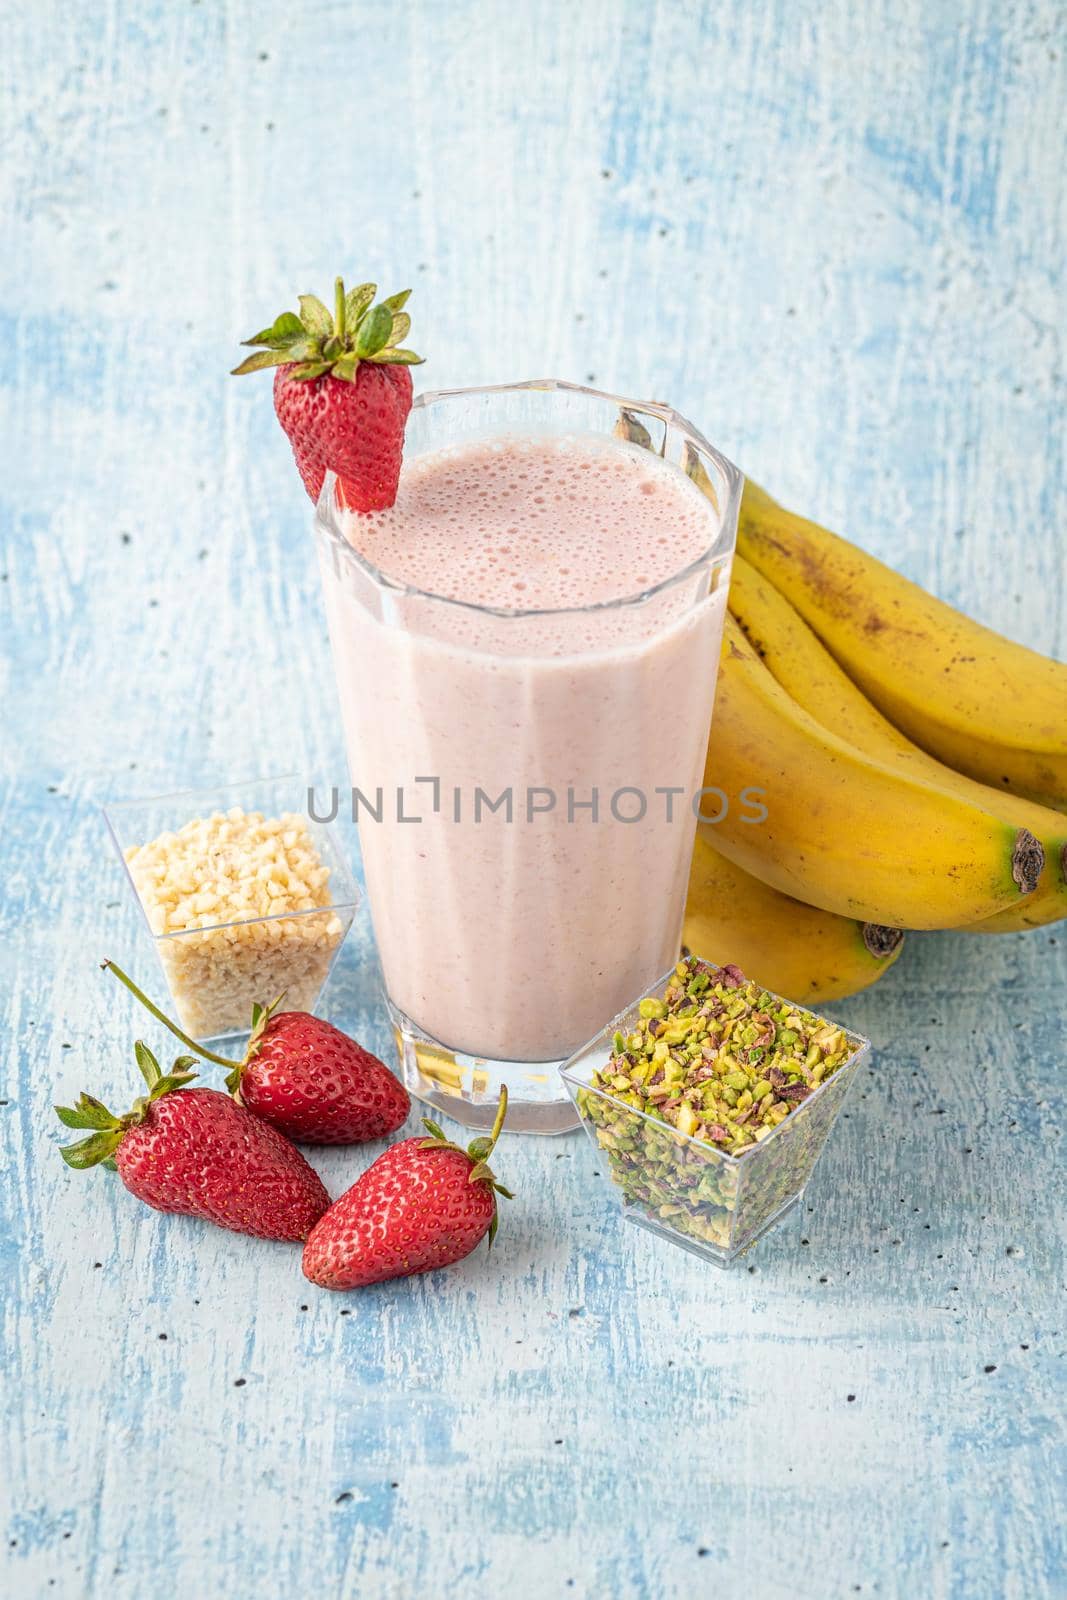 Strawberry and banana cold smoothie on blue background by Sonat